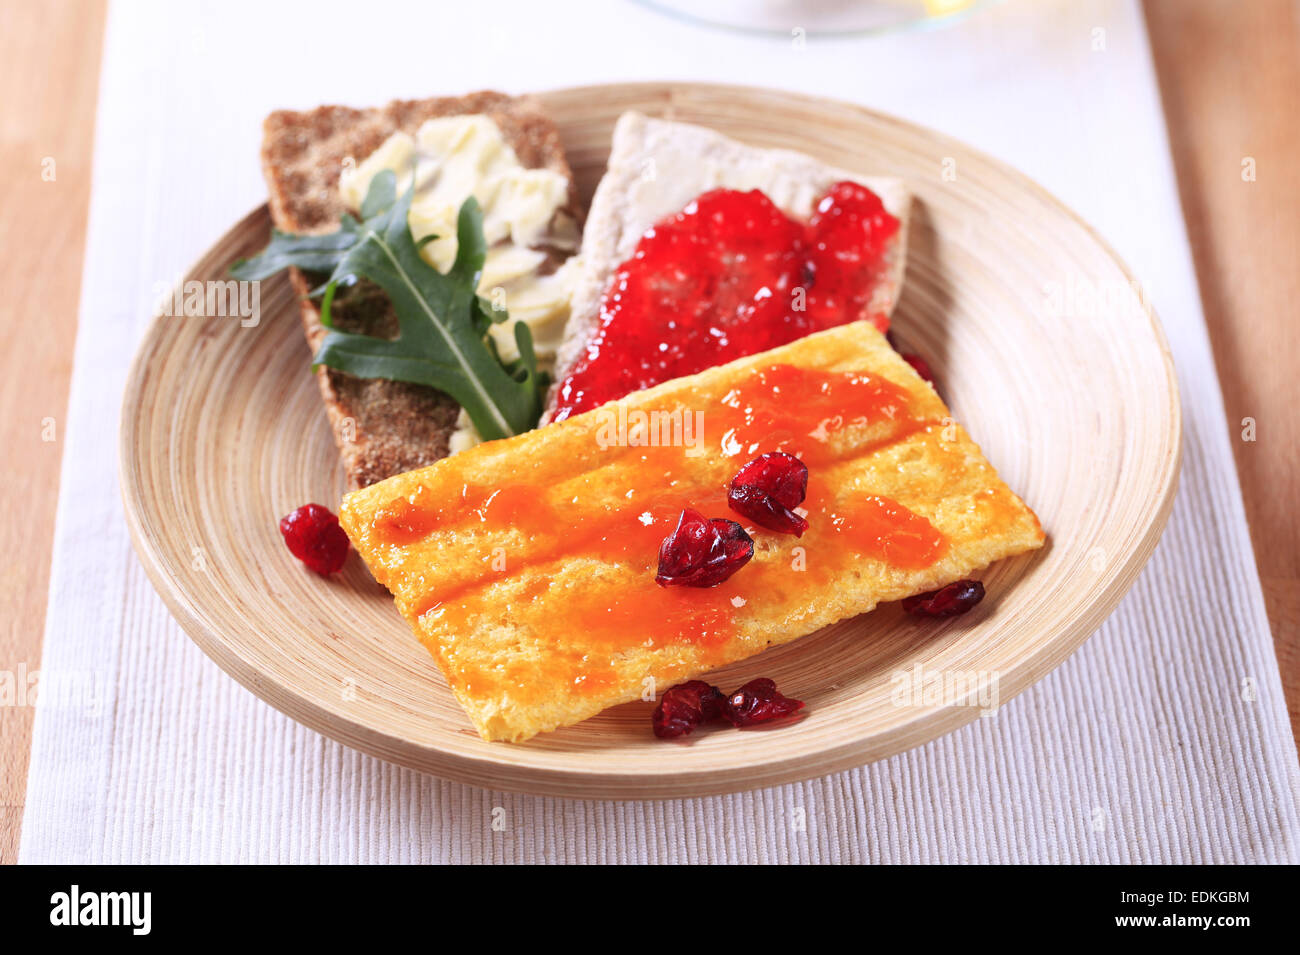 Crisp bread with butter and jam Stock Photo